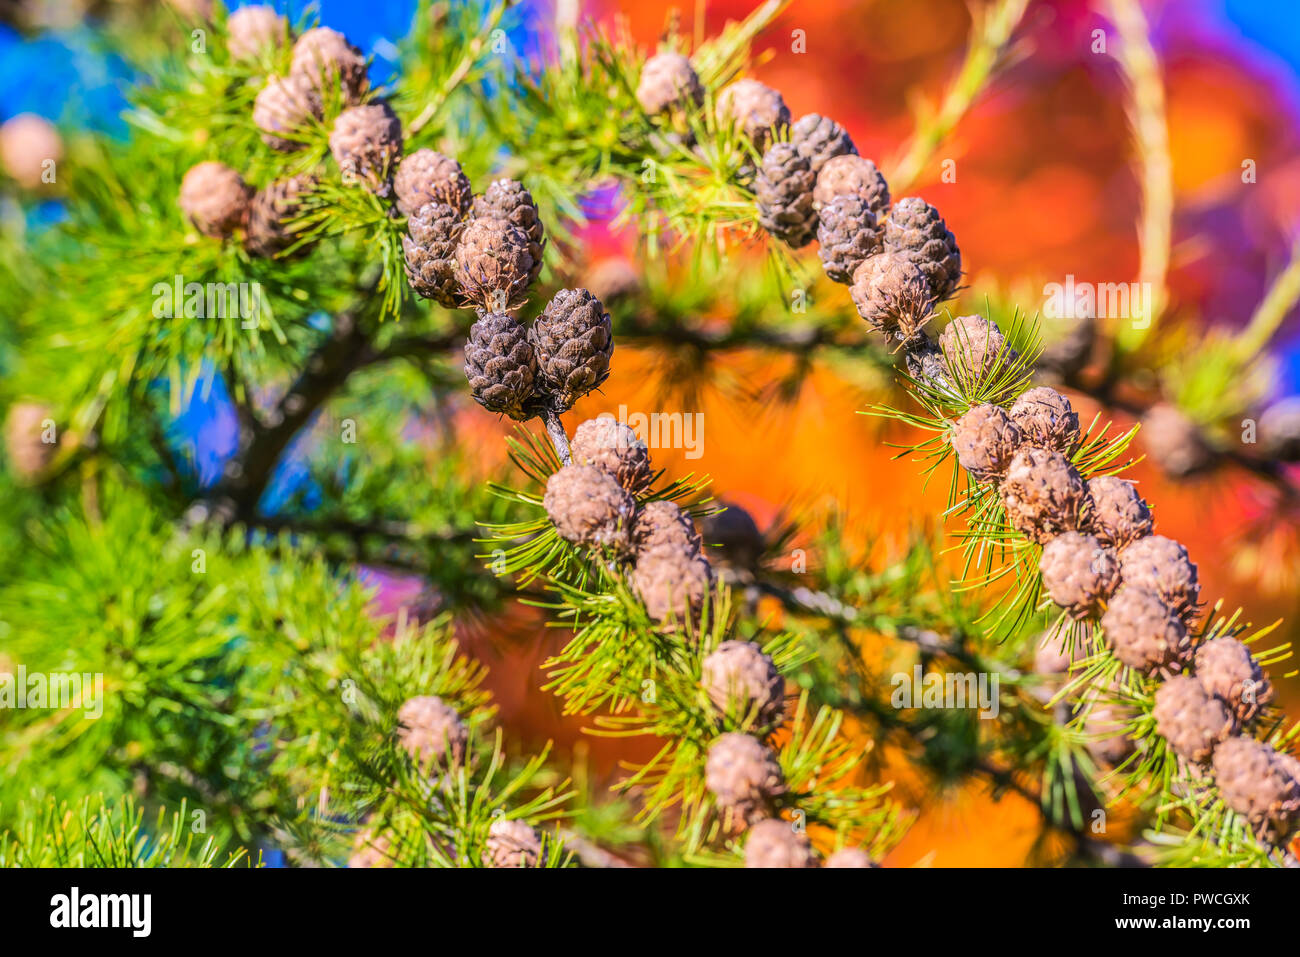 Larch branches with cones in the autumn park. Stock Photo